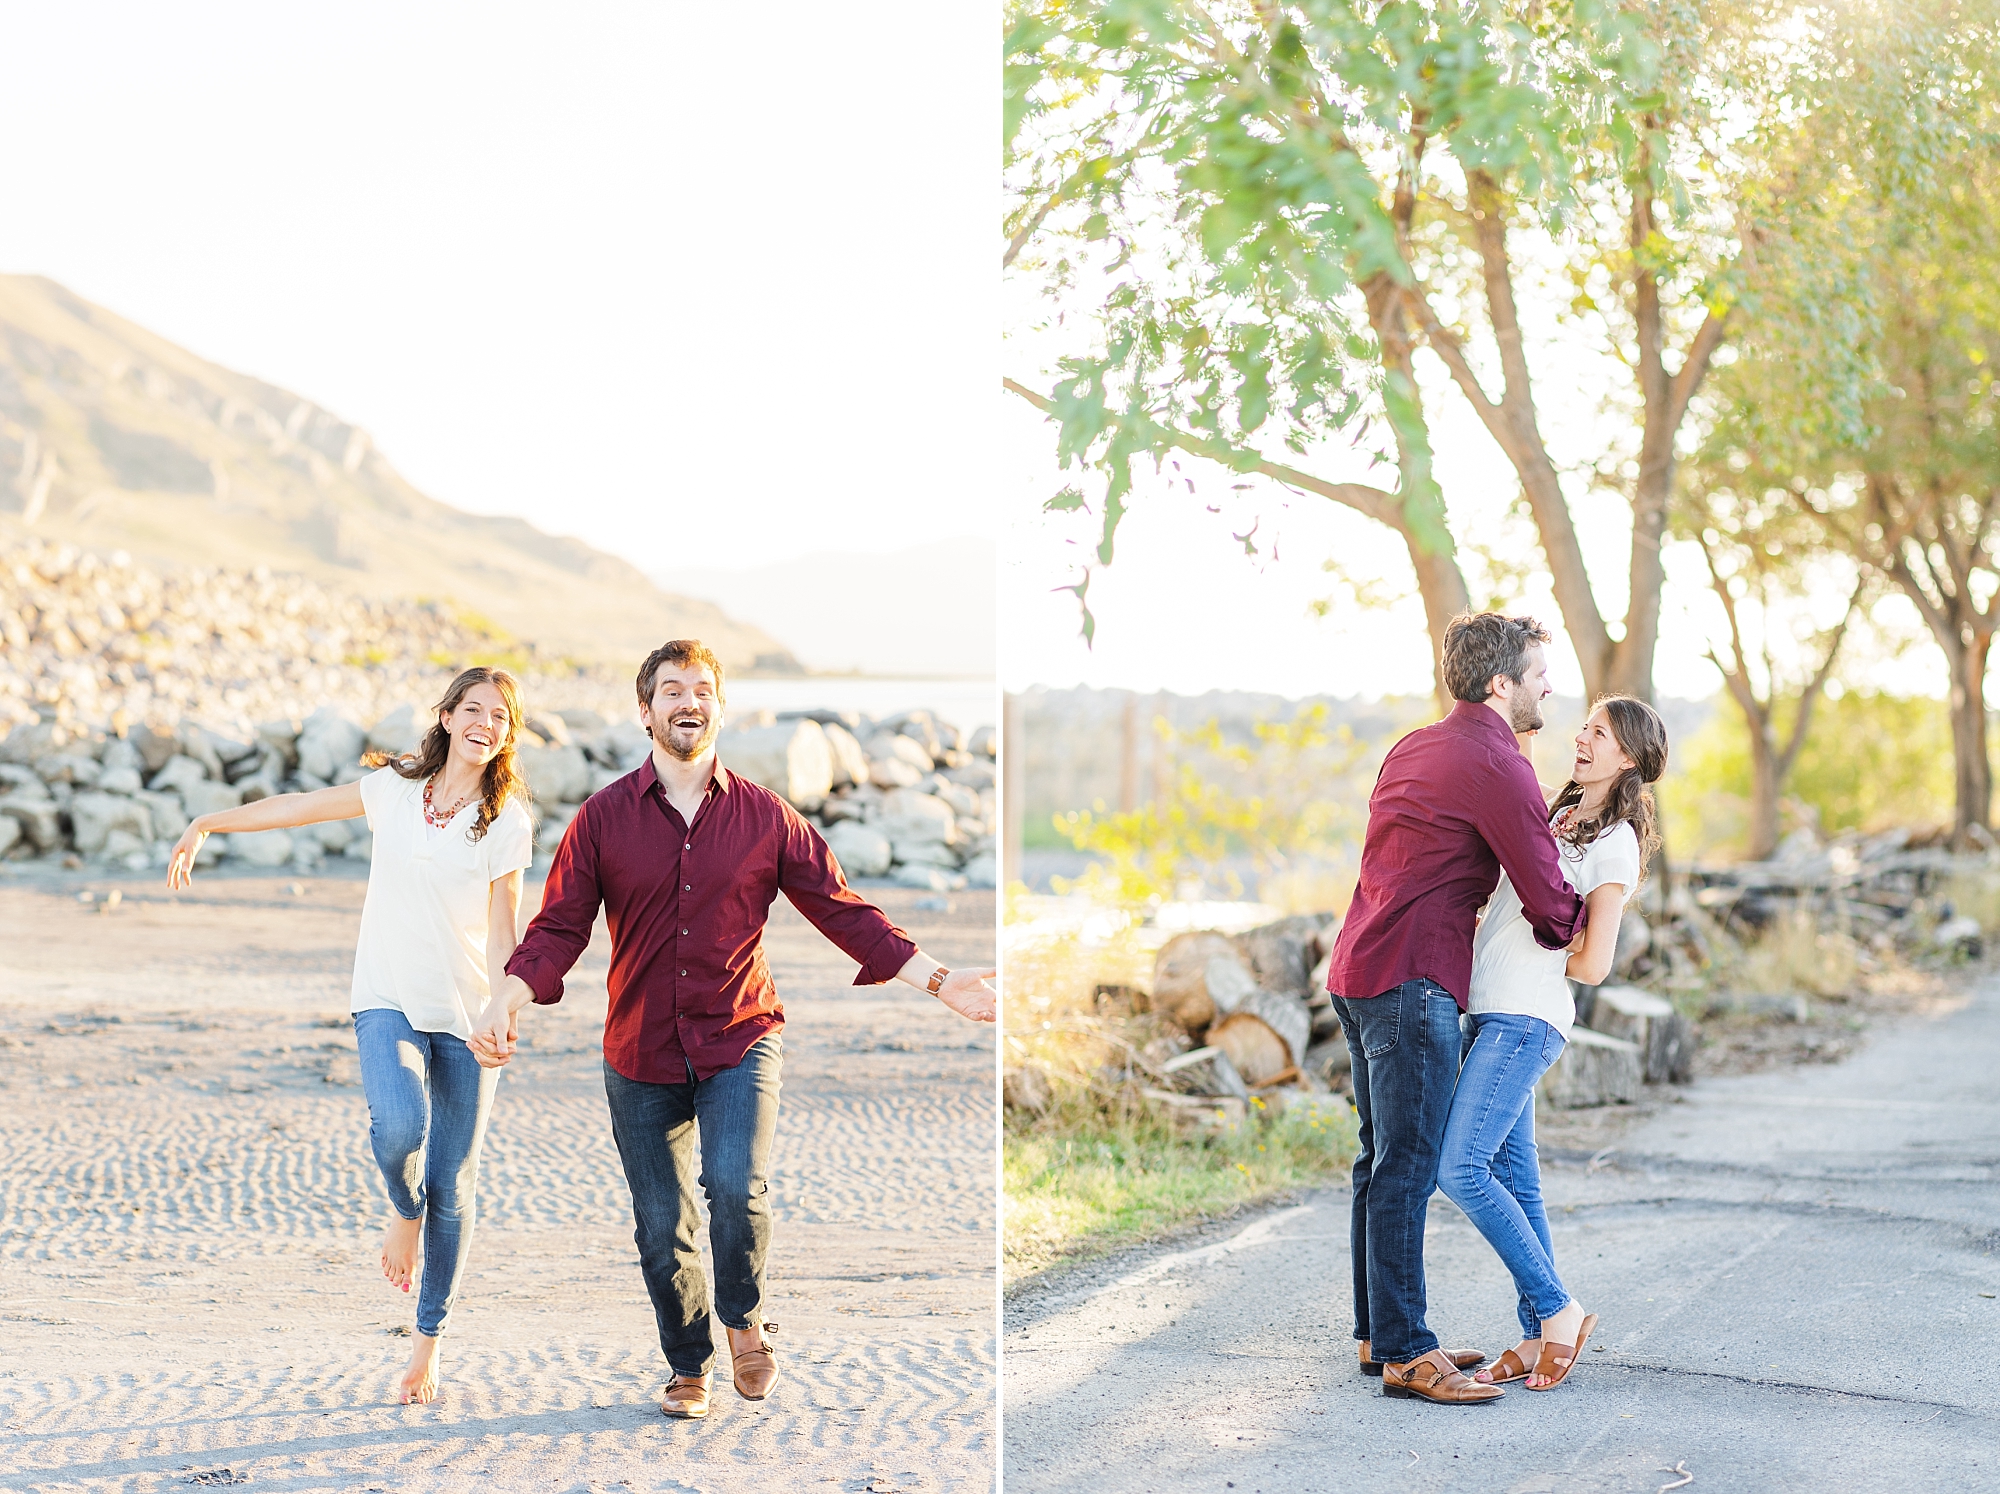 Being yourself and bringing your playfulness to your engagement session will give you your very best photos!